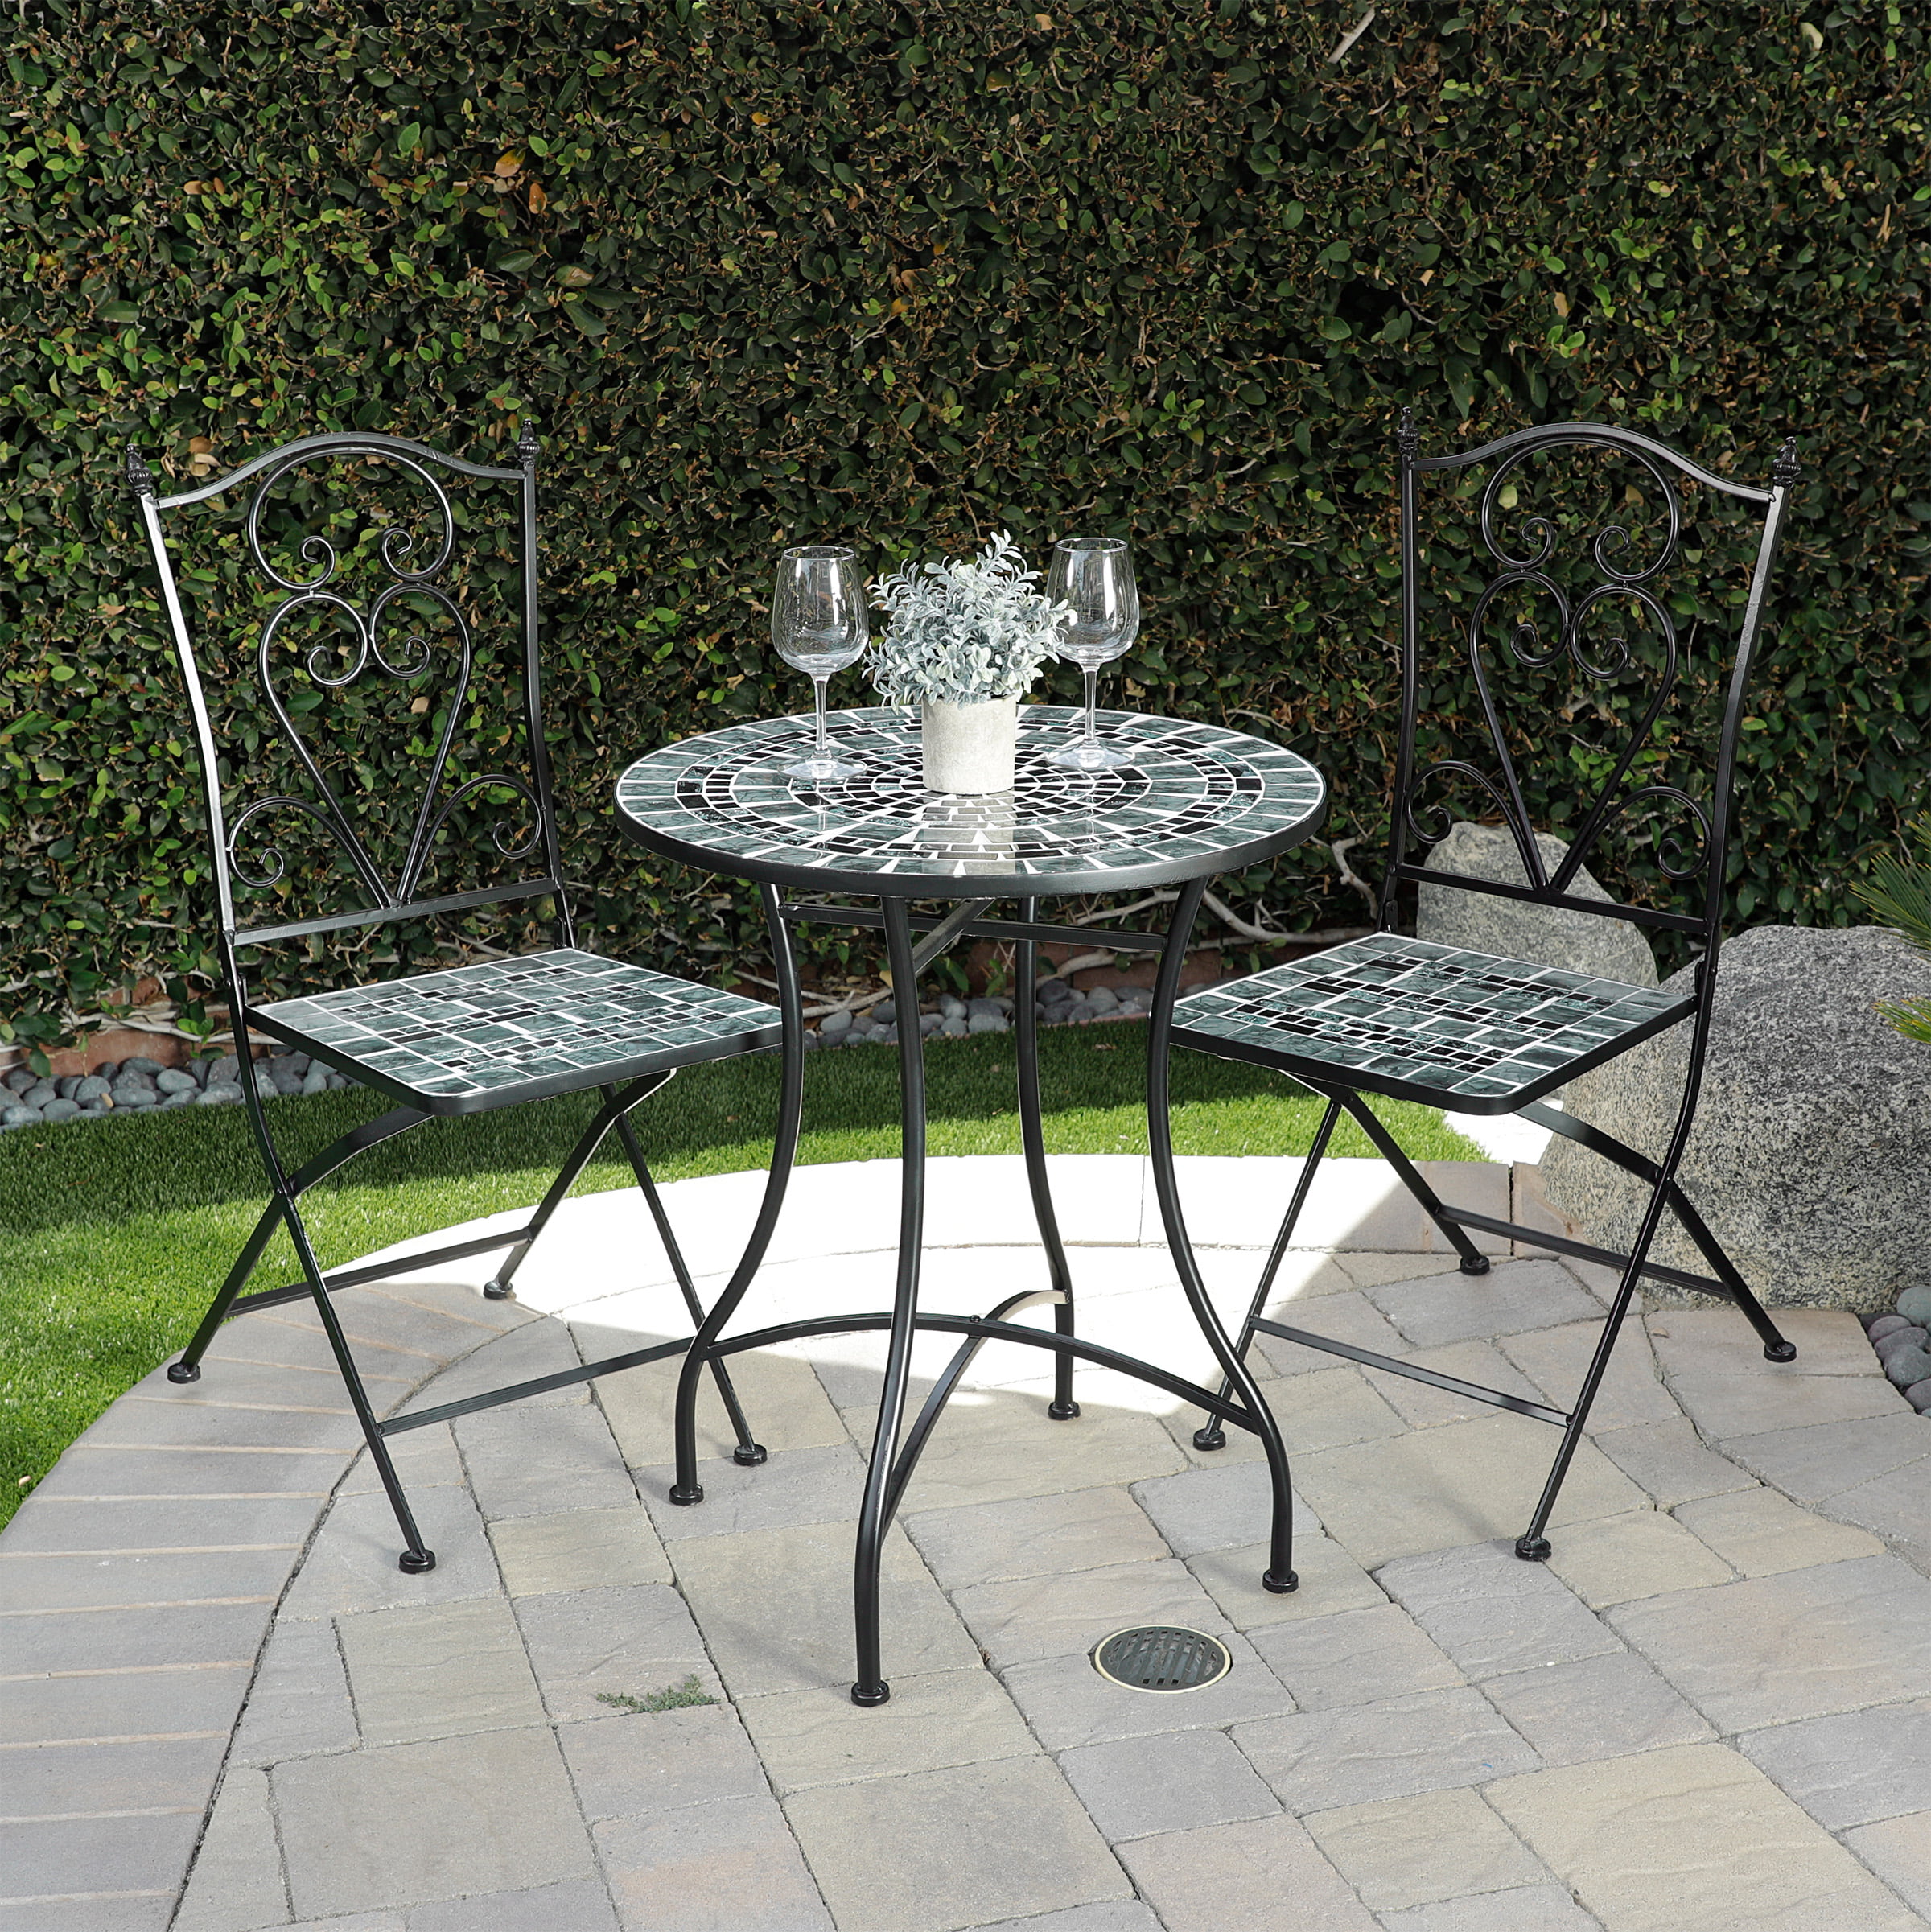 Bistro Patio set 3pc Folding Table/Chair Outdoor Furniture Wrought Iron CAFE set 